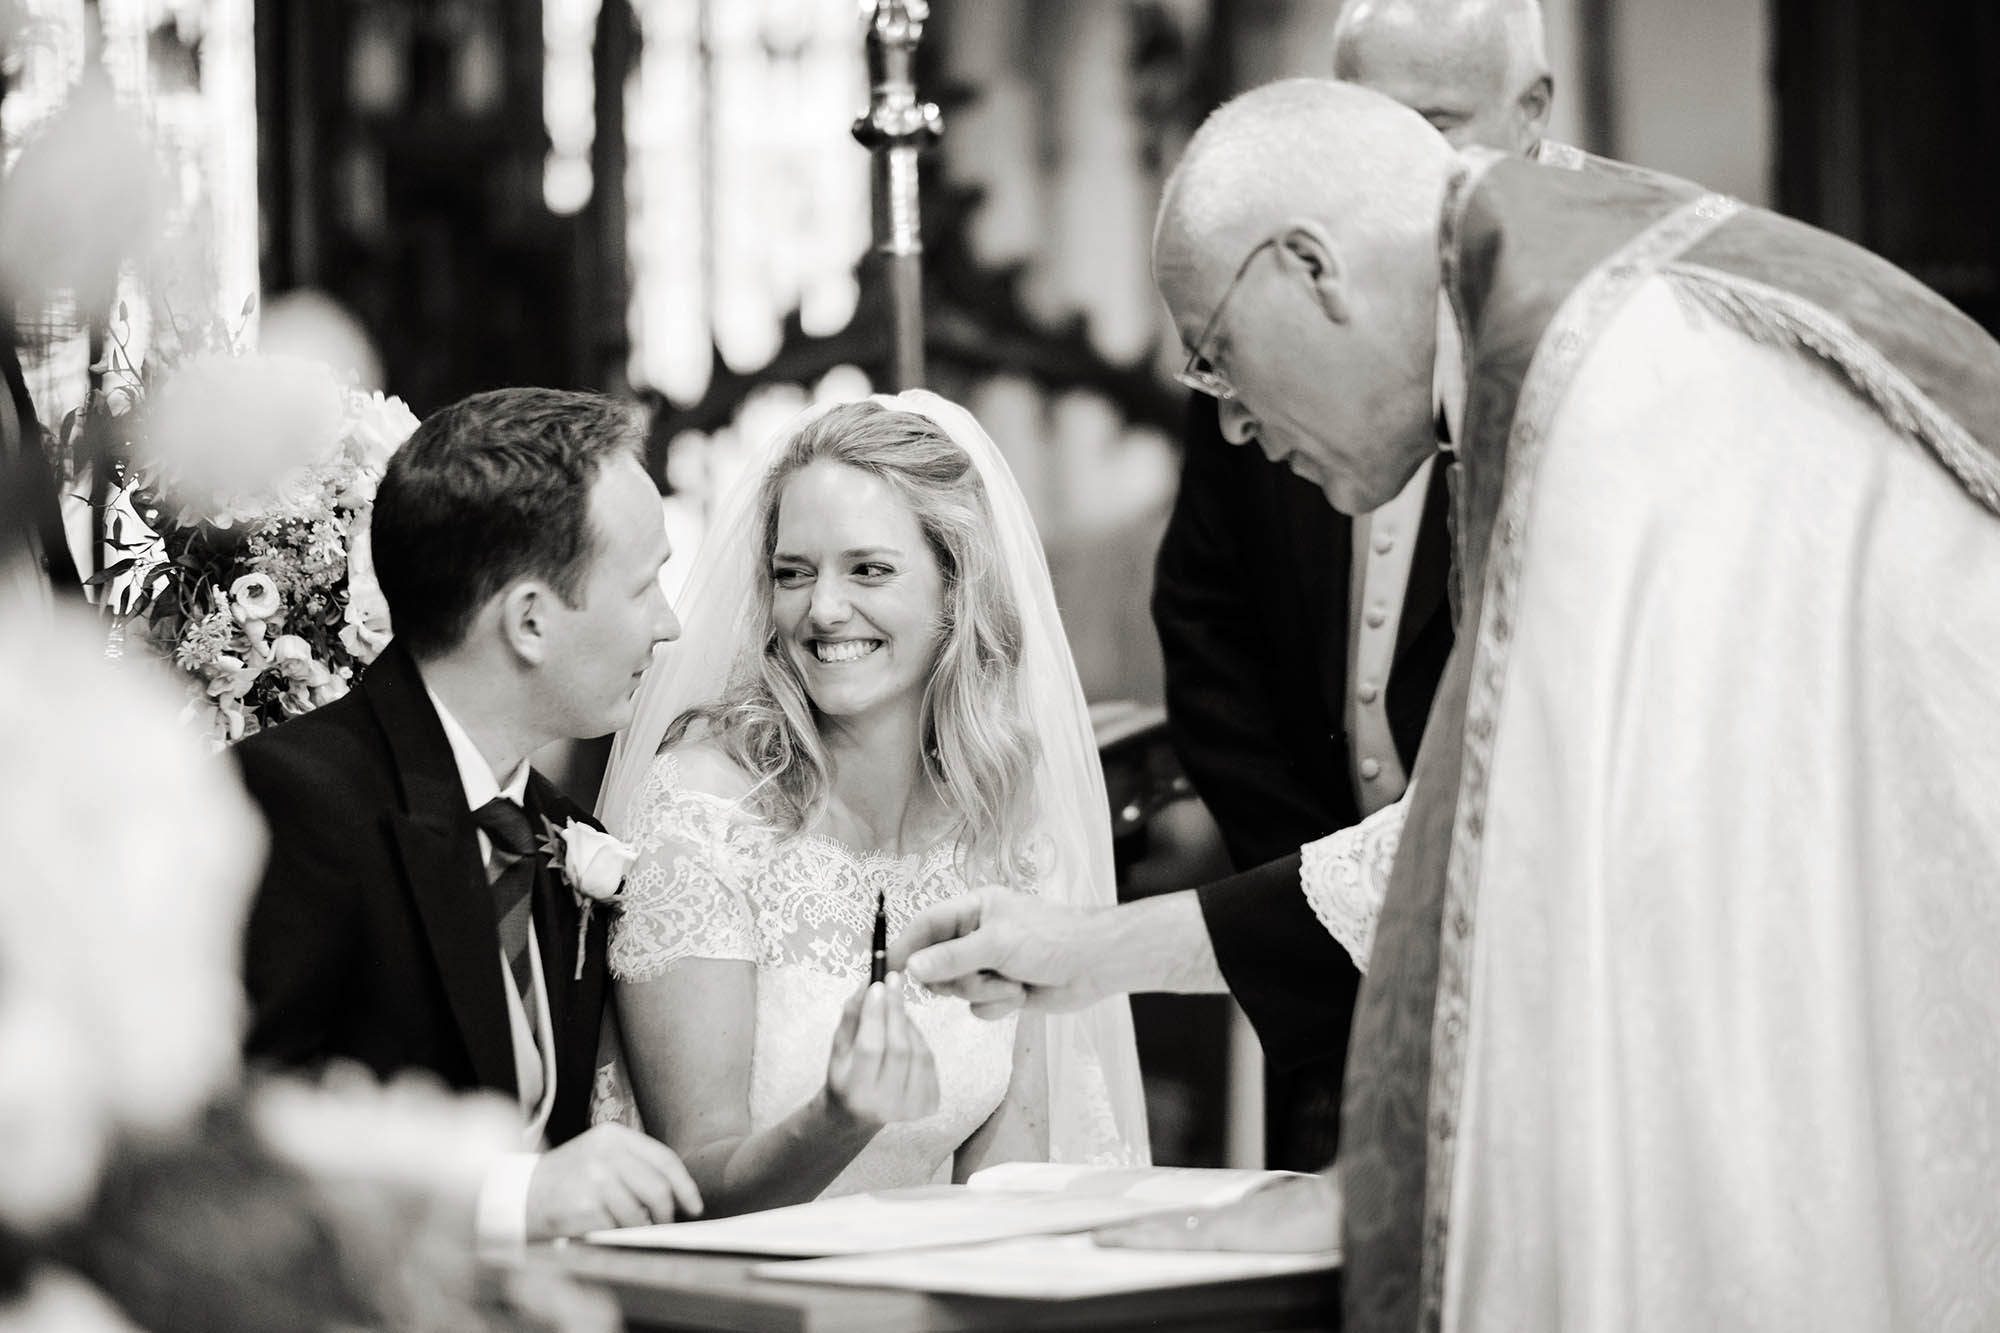 A bride smiles at her new husband as she hands the pen back to the priest after signing the marriage register - Sheffield wedding photographer John Mottershaw